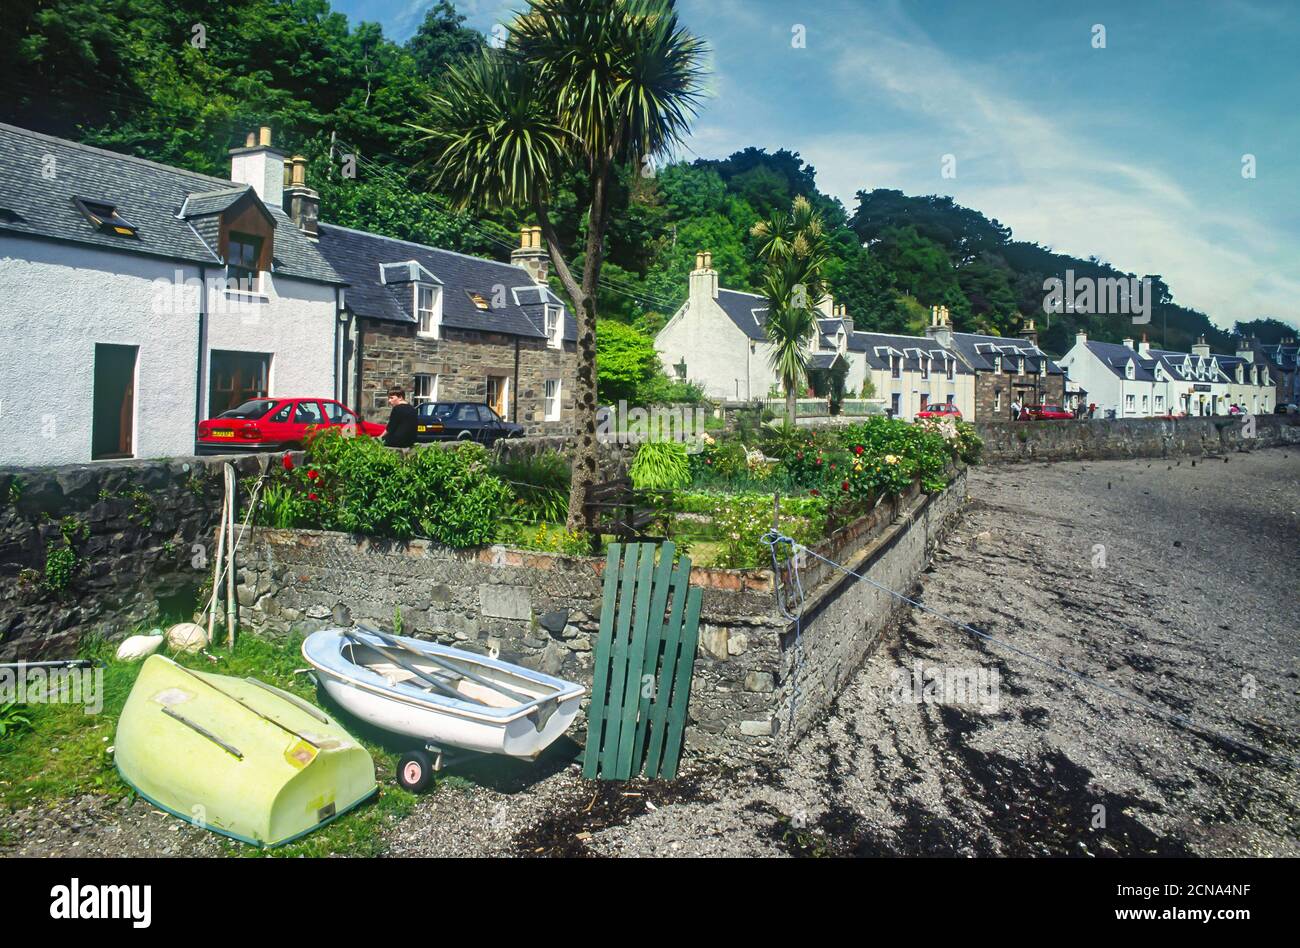 The beautiful village of Plockton situated on a inlet of Loch Carron in the West Highlands of Scotland Stock Photo